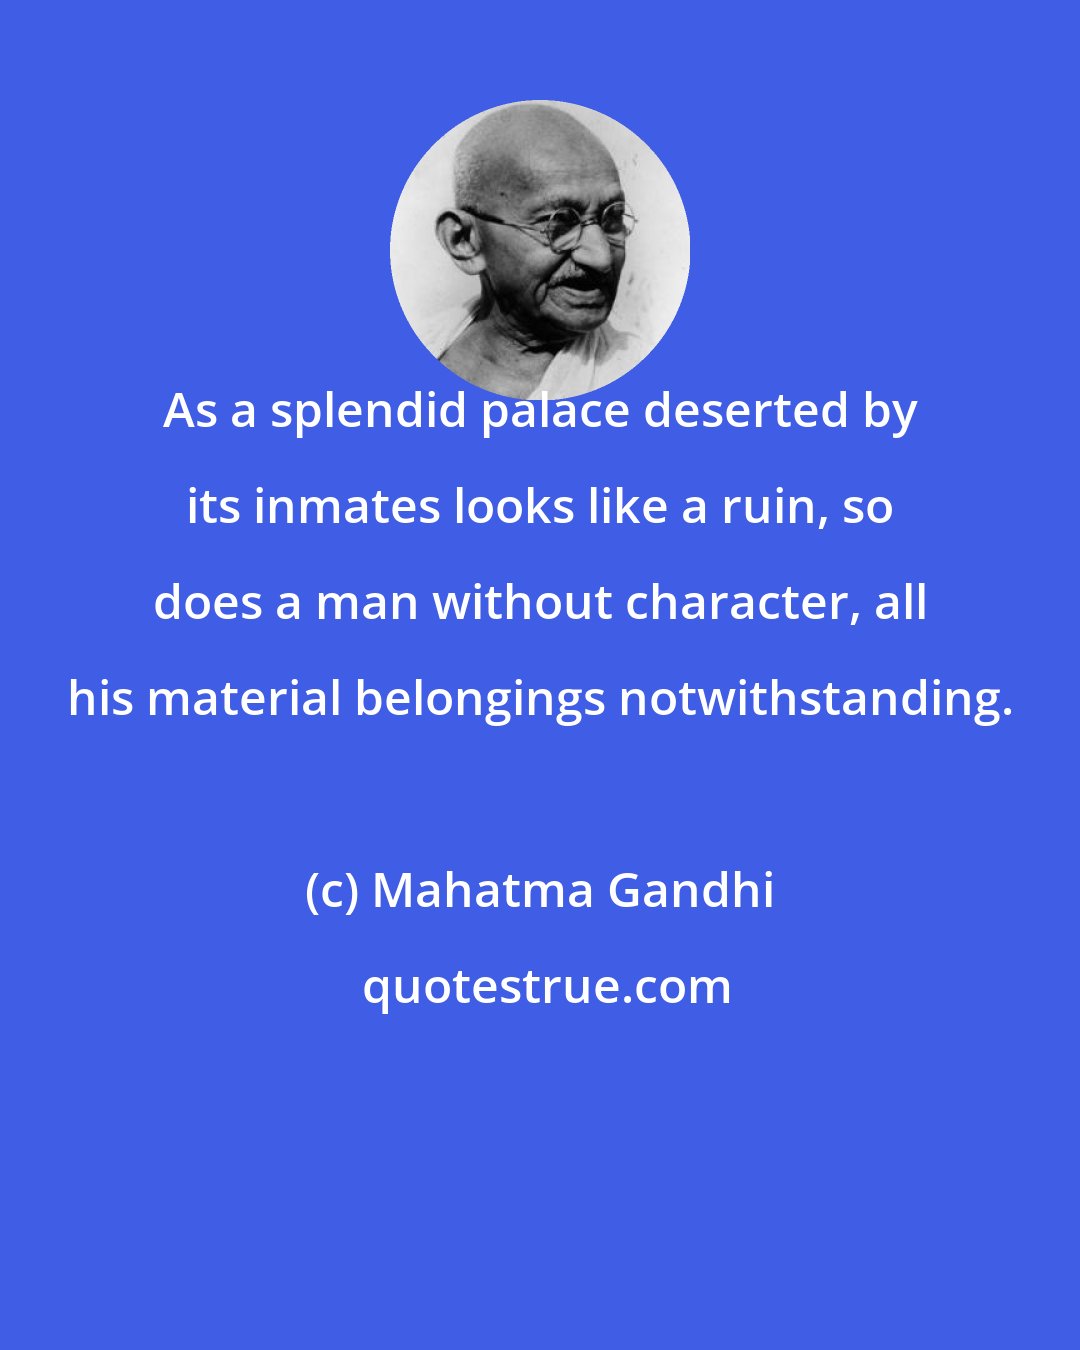 Mahatma Gandhi: As a splendid palace deserted by its inmates looks like a ruin, so does a man without character, all his material belongings notwithstanding.